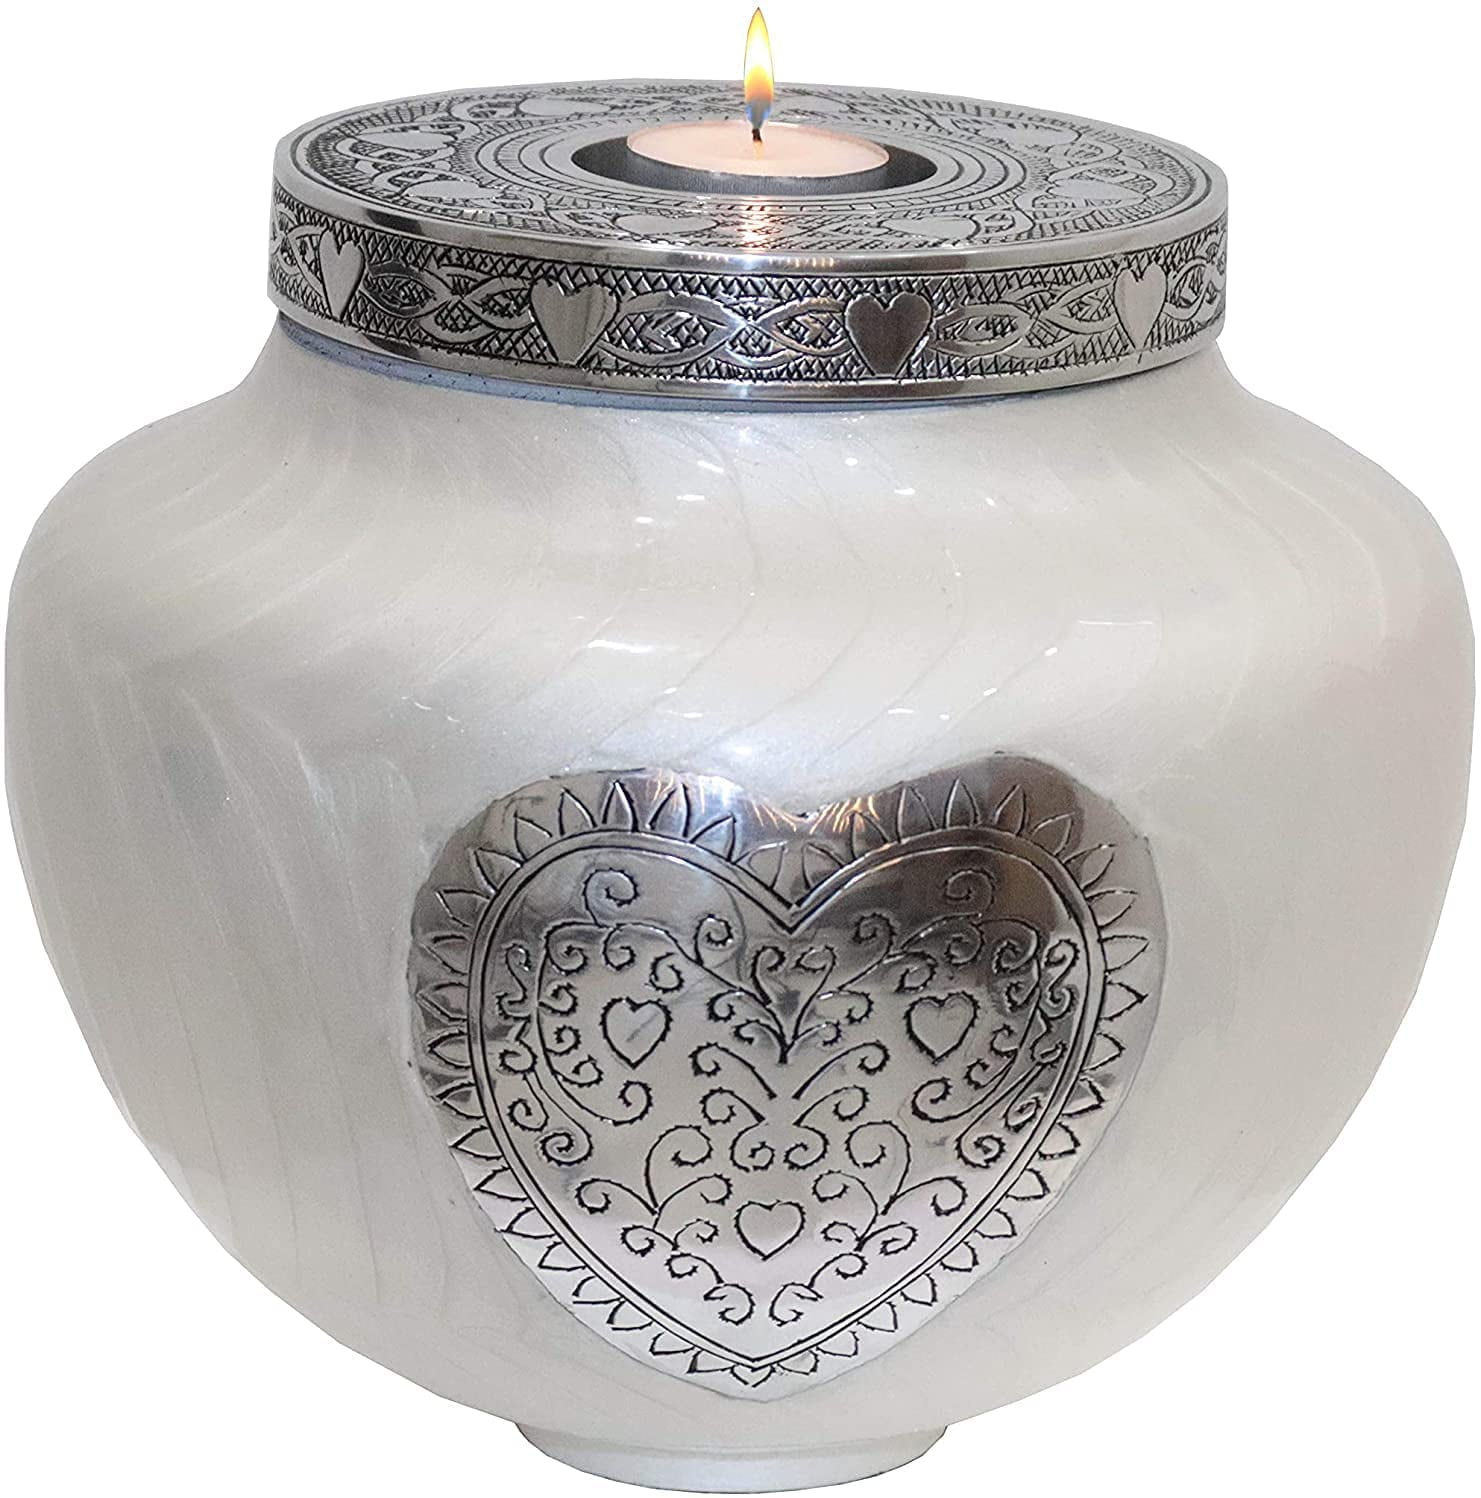 Burial Cremation Urns for Human Ashes Adult 200 Cubic Inches:- with Velvet Bag White Columbarium or Home Humming Bird Cremation URNS,URN for Human Ashes Adult URN for Funeral 